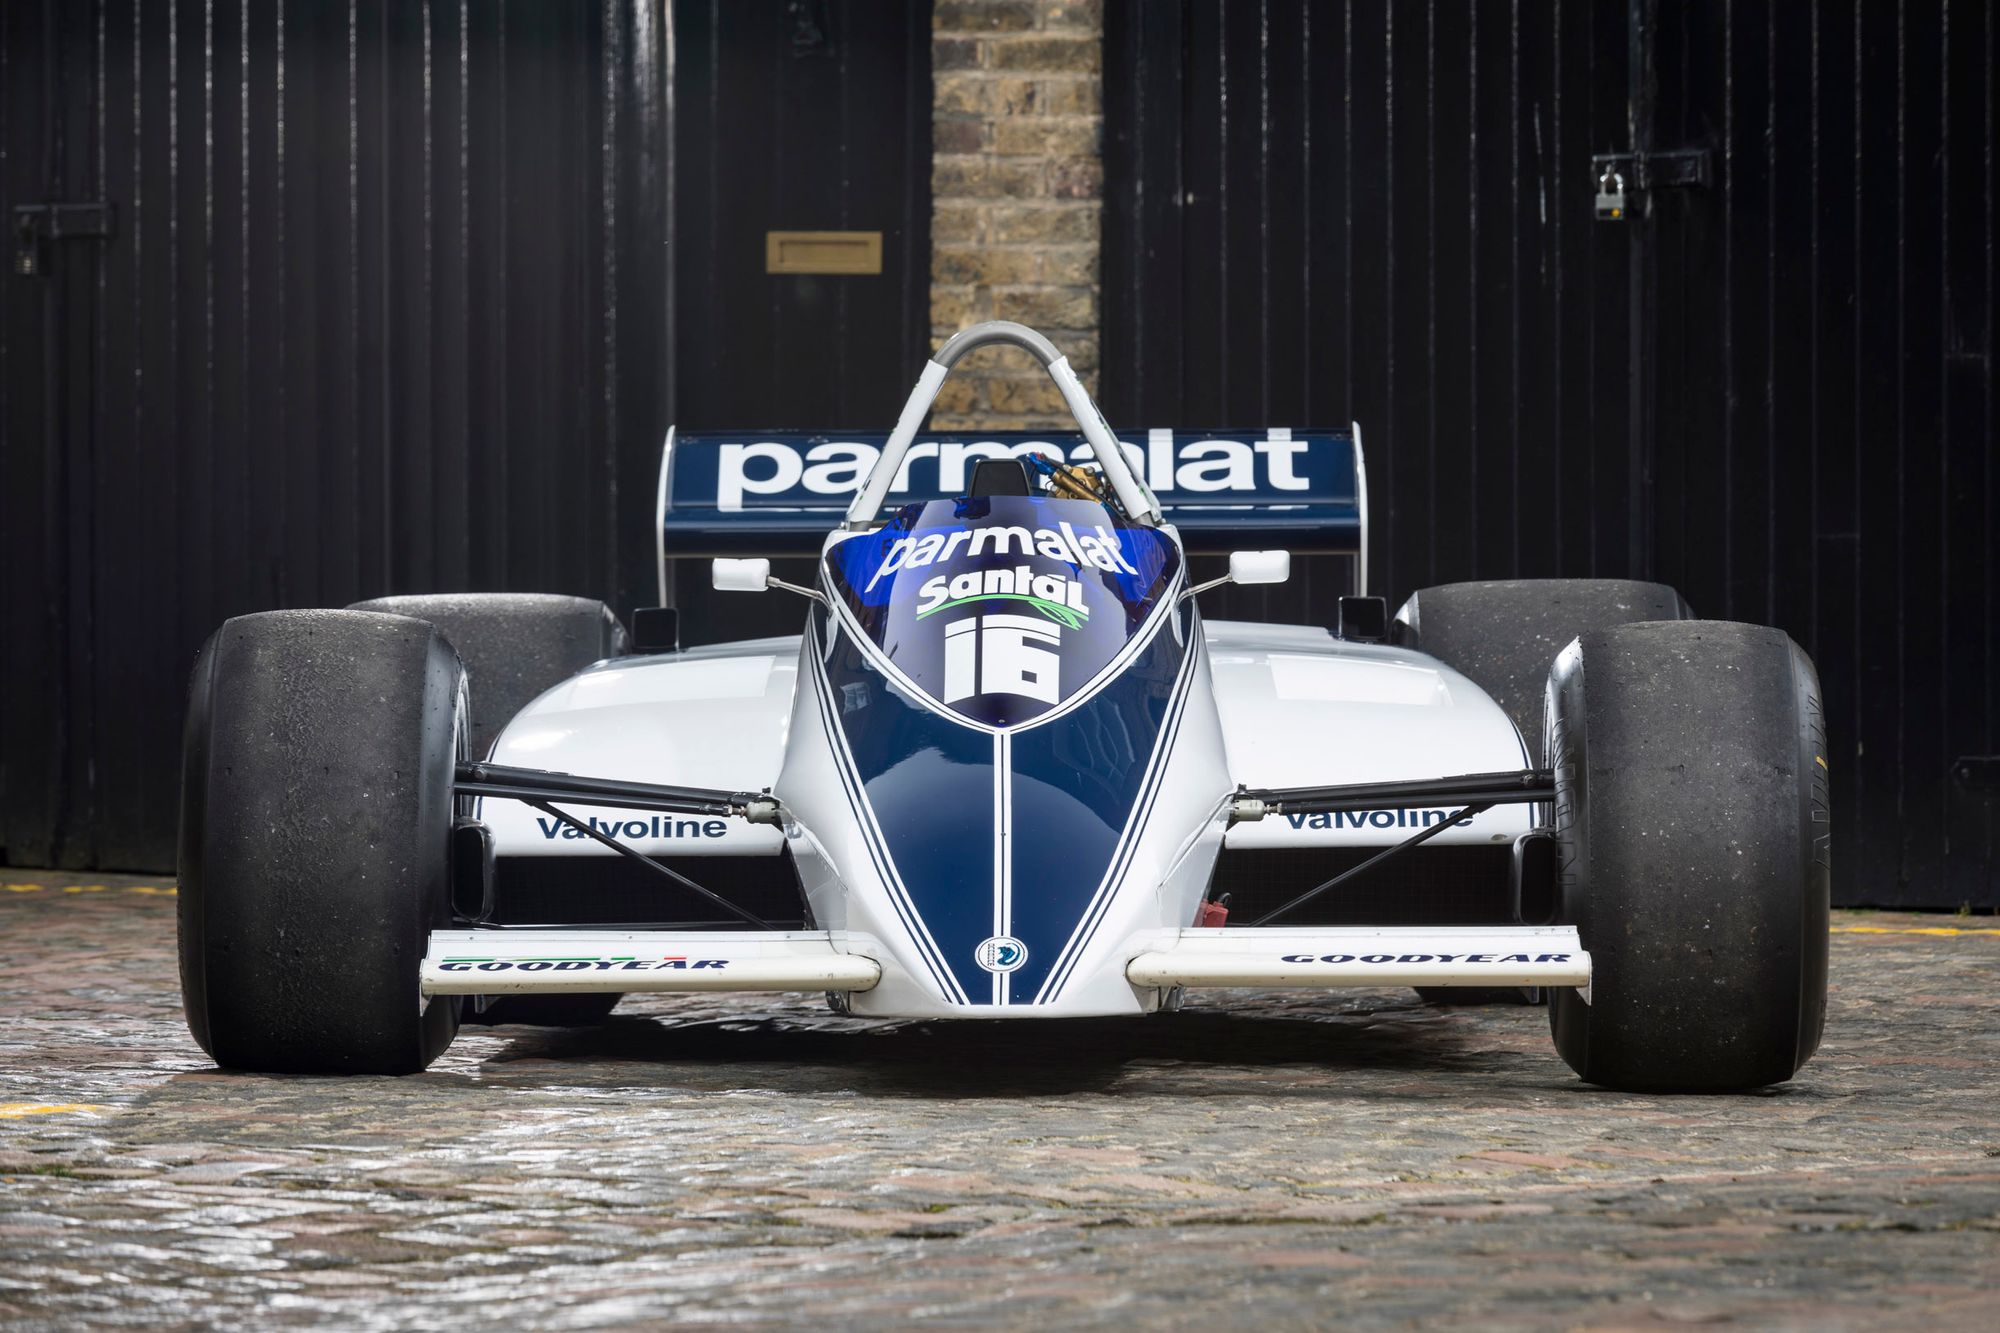 BRABHAM BT49: Gordon Murray 's masterpiece for the first title since 1967